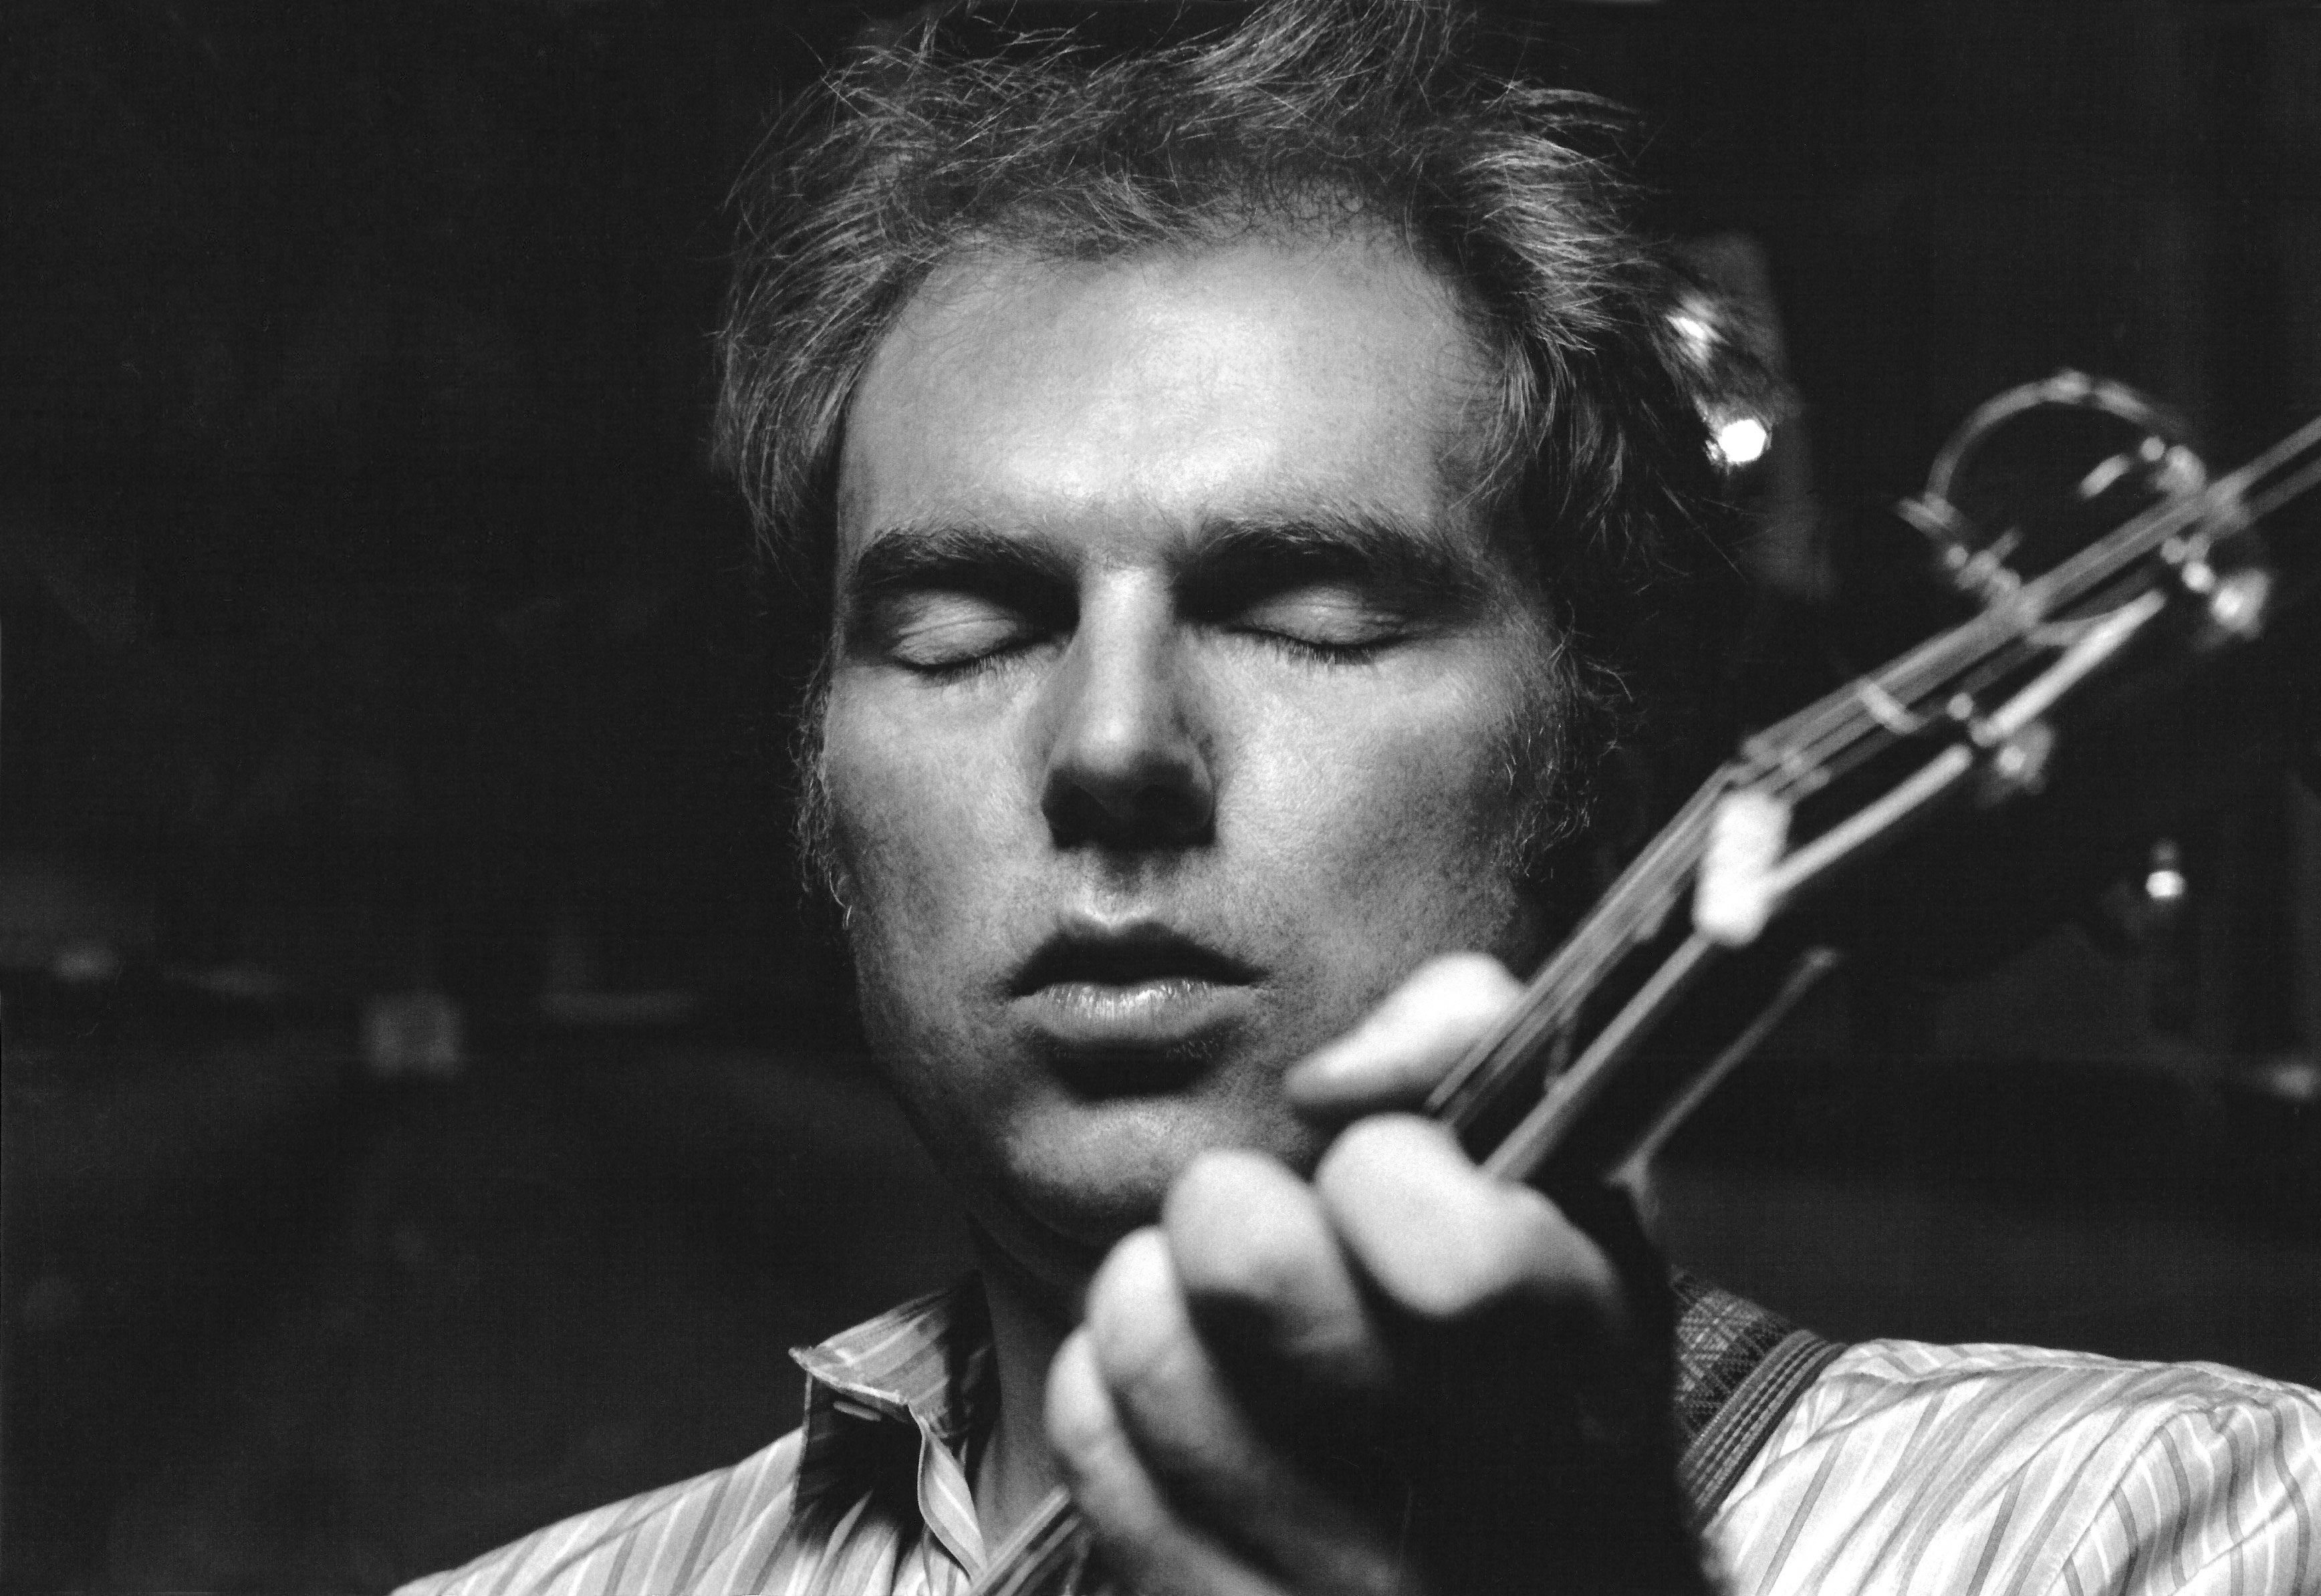 33 Van Morrison Albums To See Digital Release; Available On All Streaming Services